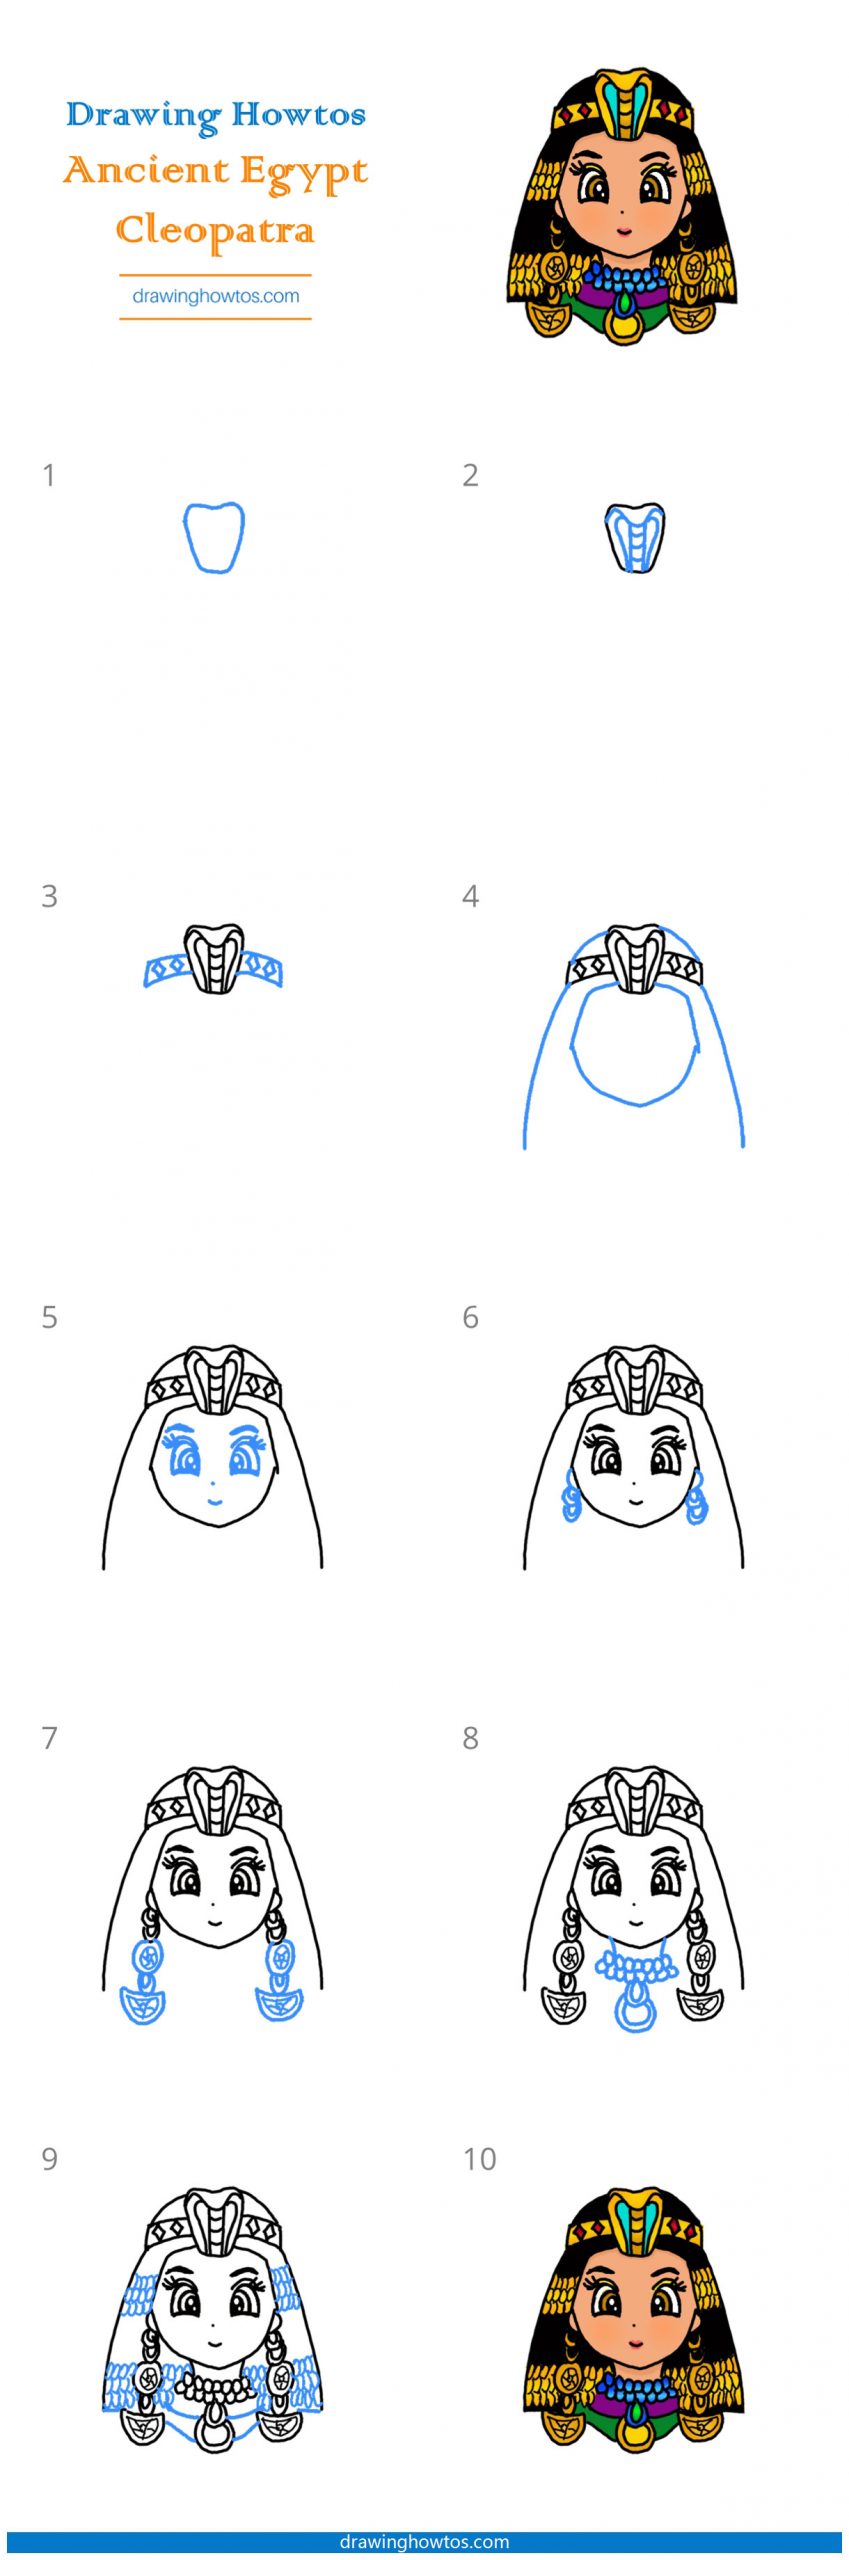 How to Draw Ancient Egypt Cleopatra Step by Step